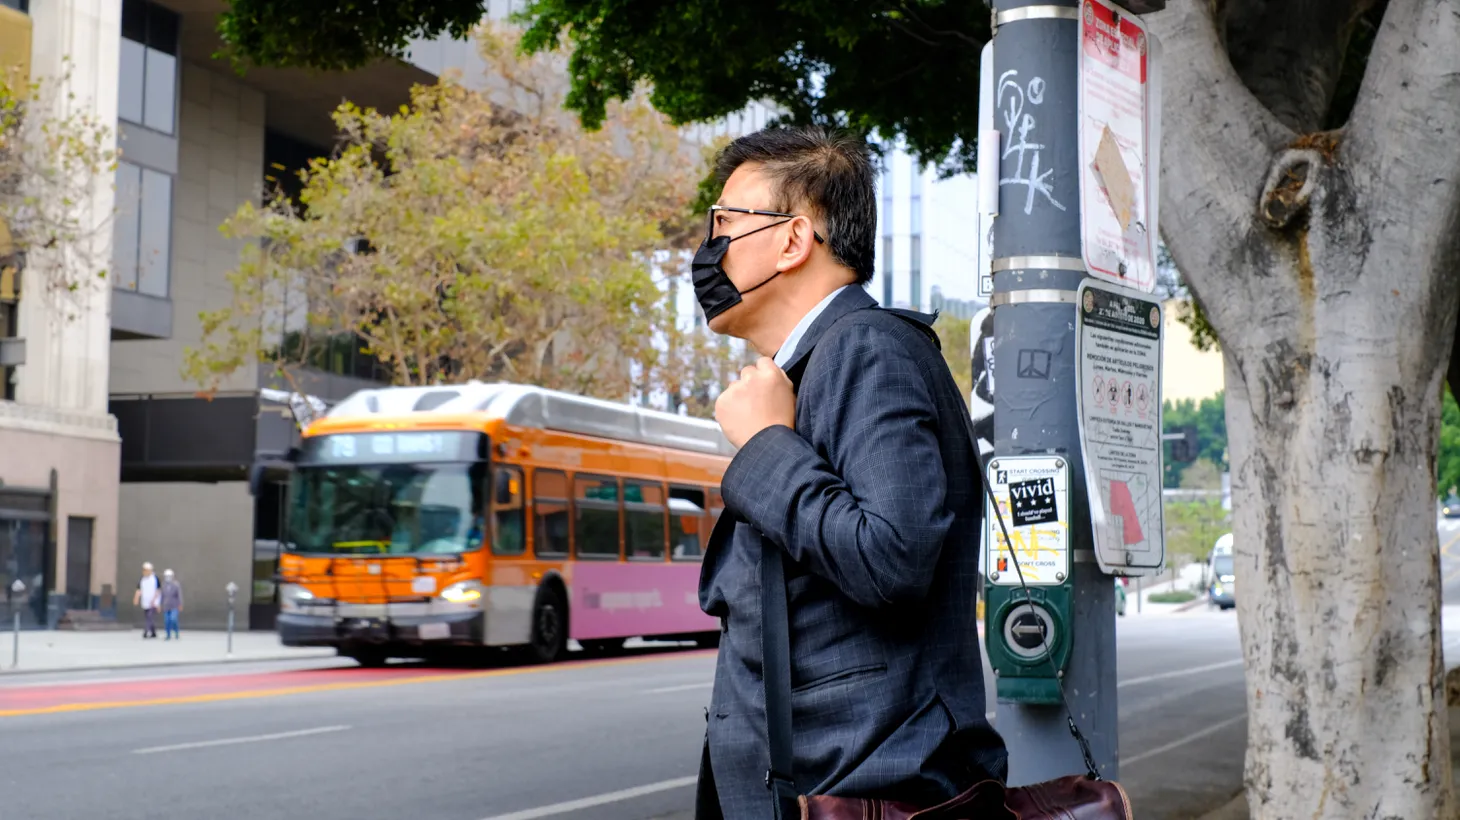 A man wears a mask at an intersection in downtown LA.